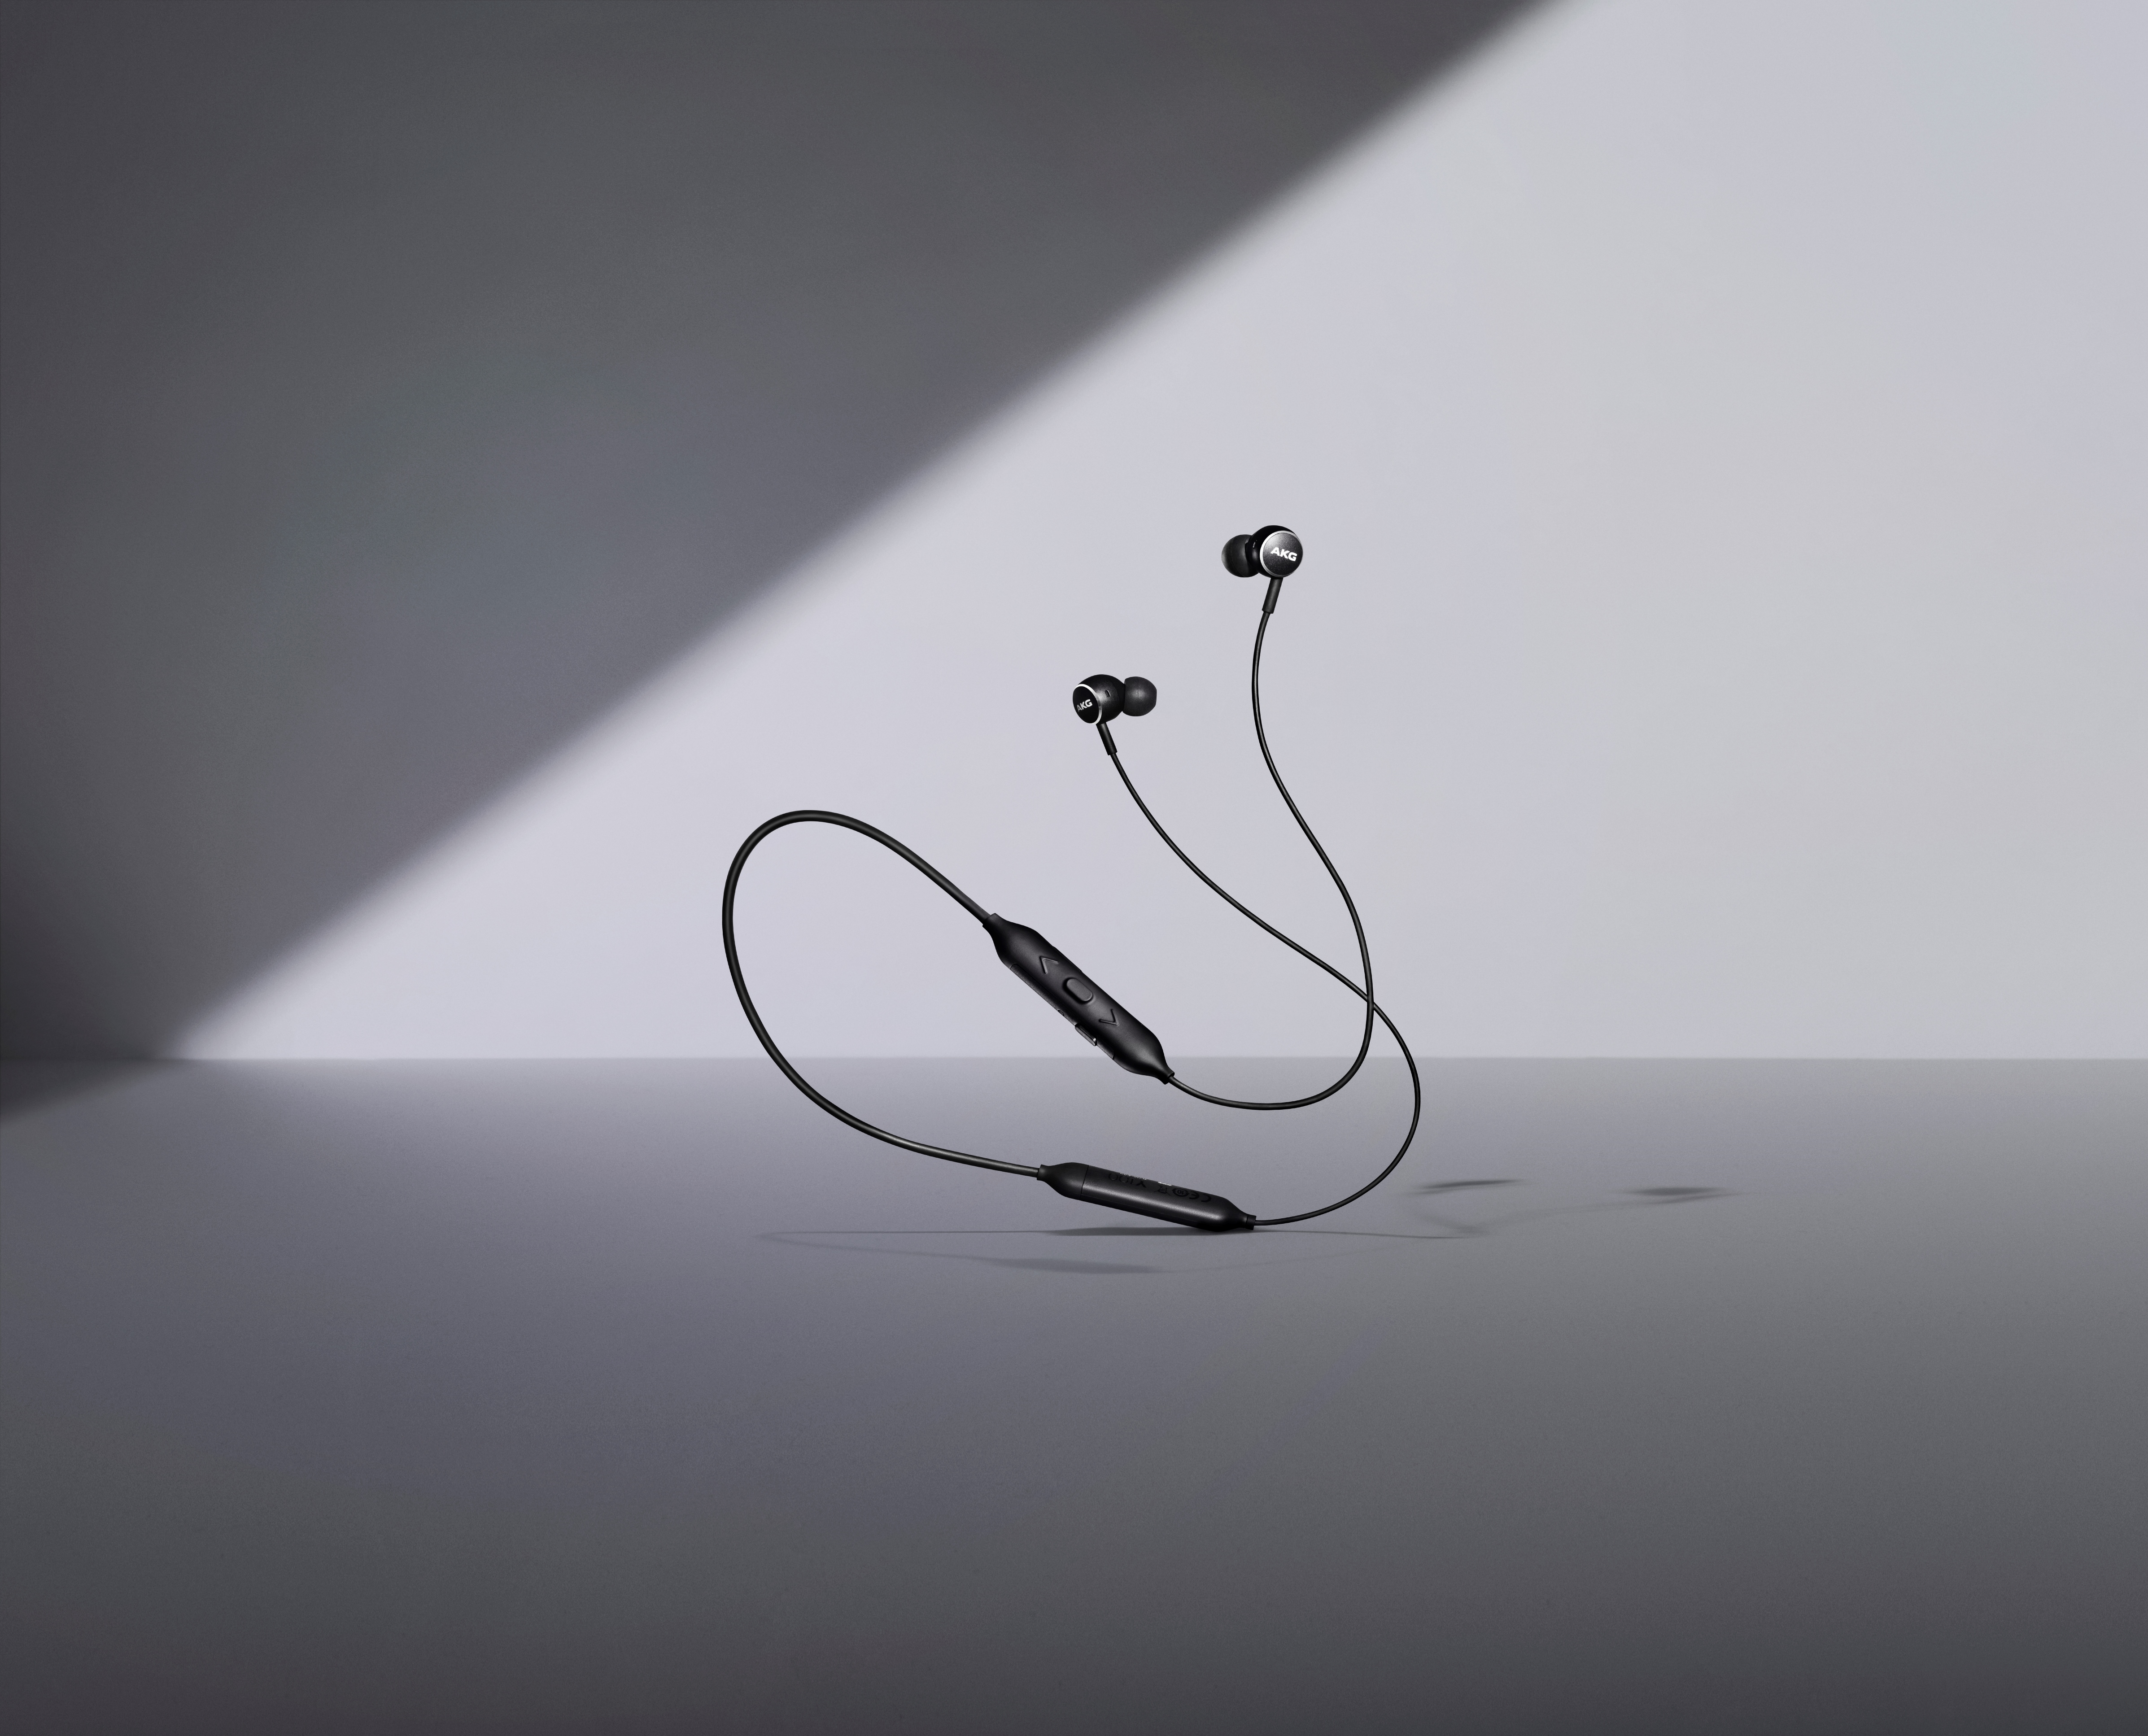 Samsung product image of the AKG Y100 wireless earbuds.